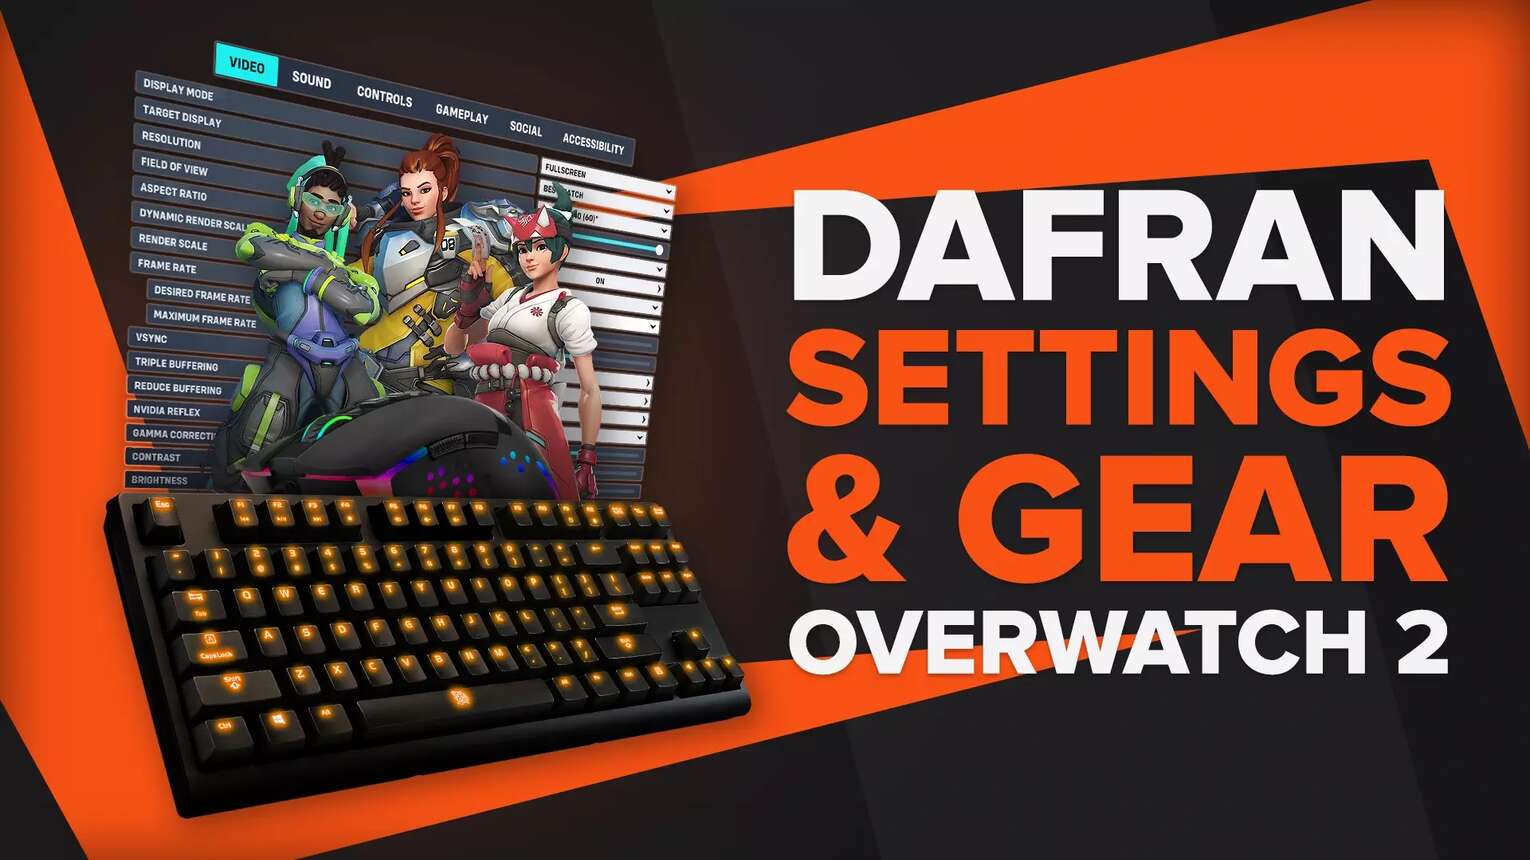 Dafran's Settings & Gear for Overwatch 2 [Updated]